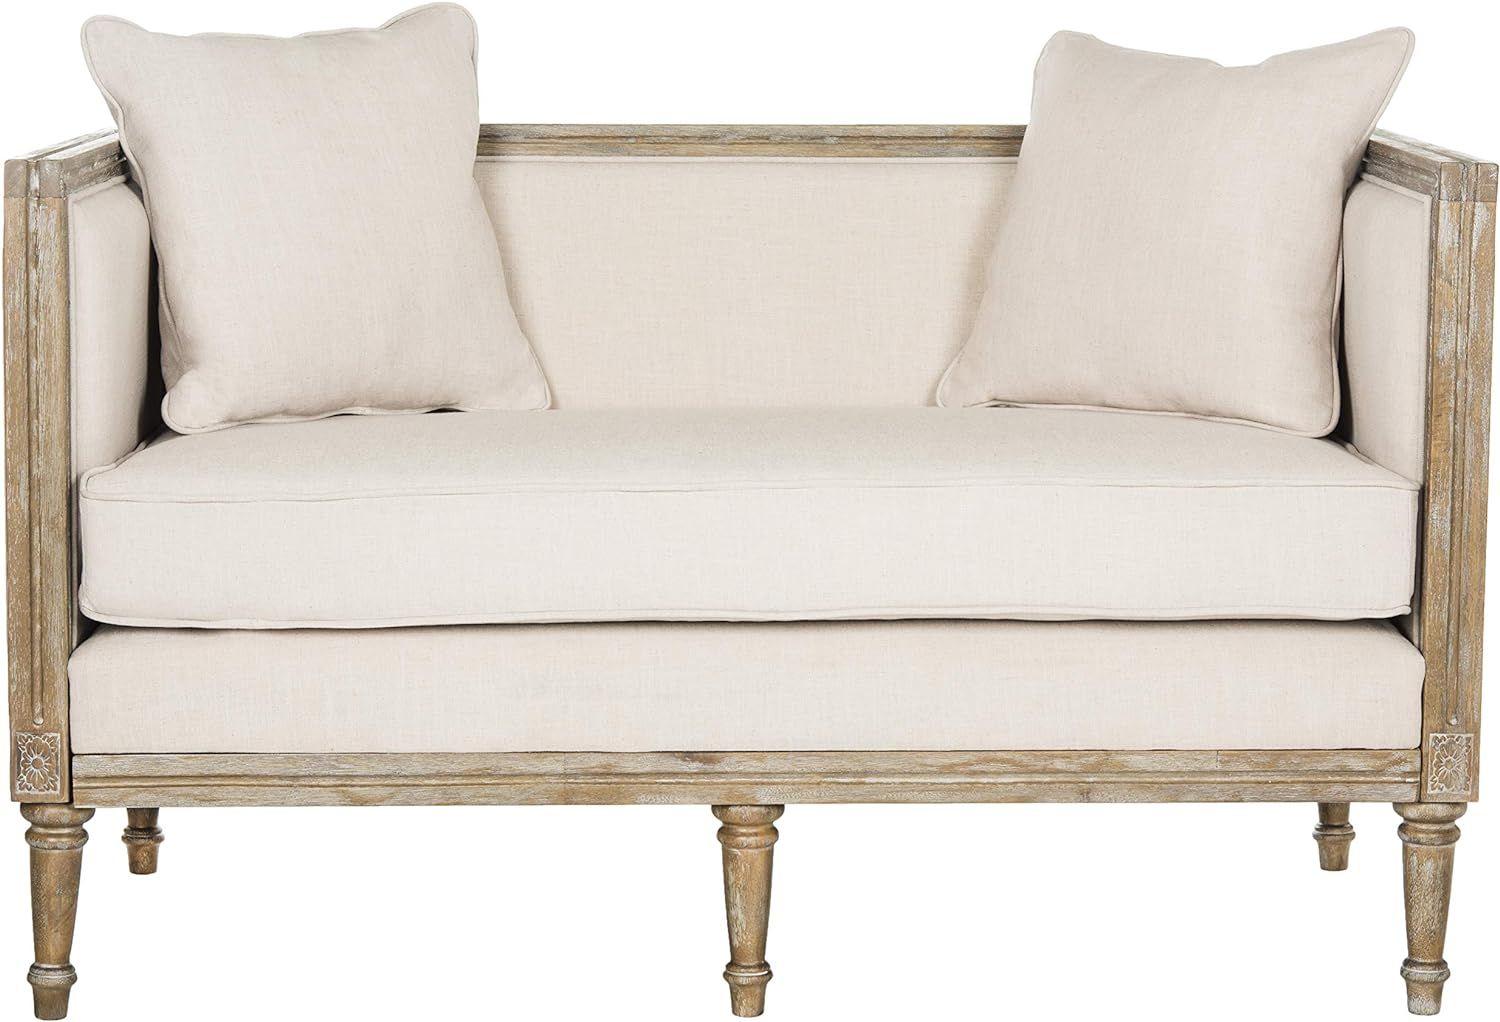 Safavieh Home Collection Leandra French Country Settee, Beige/Rustic Oak | Amazon (US)